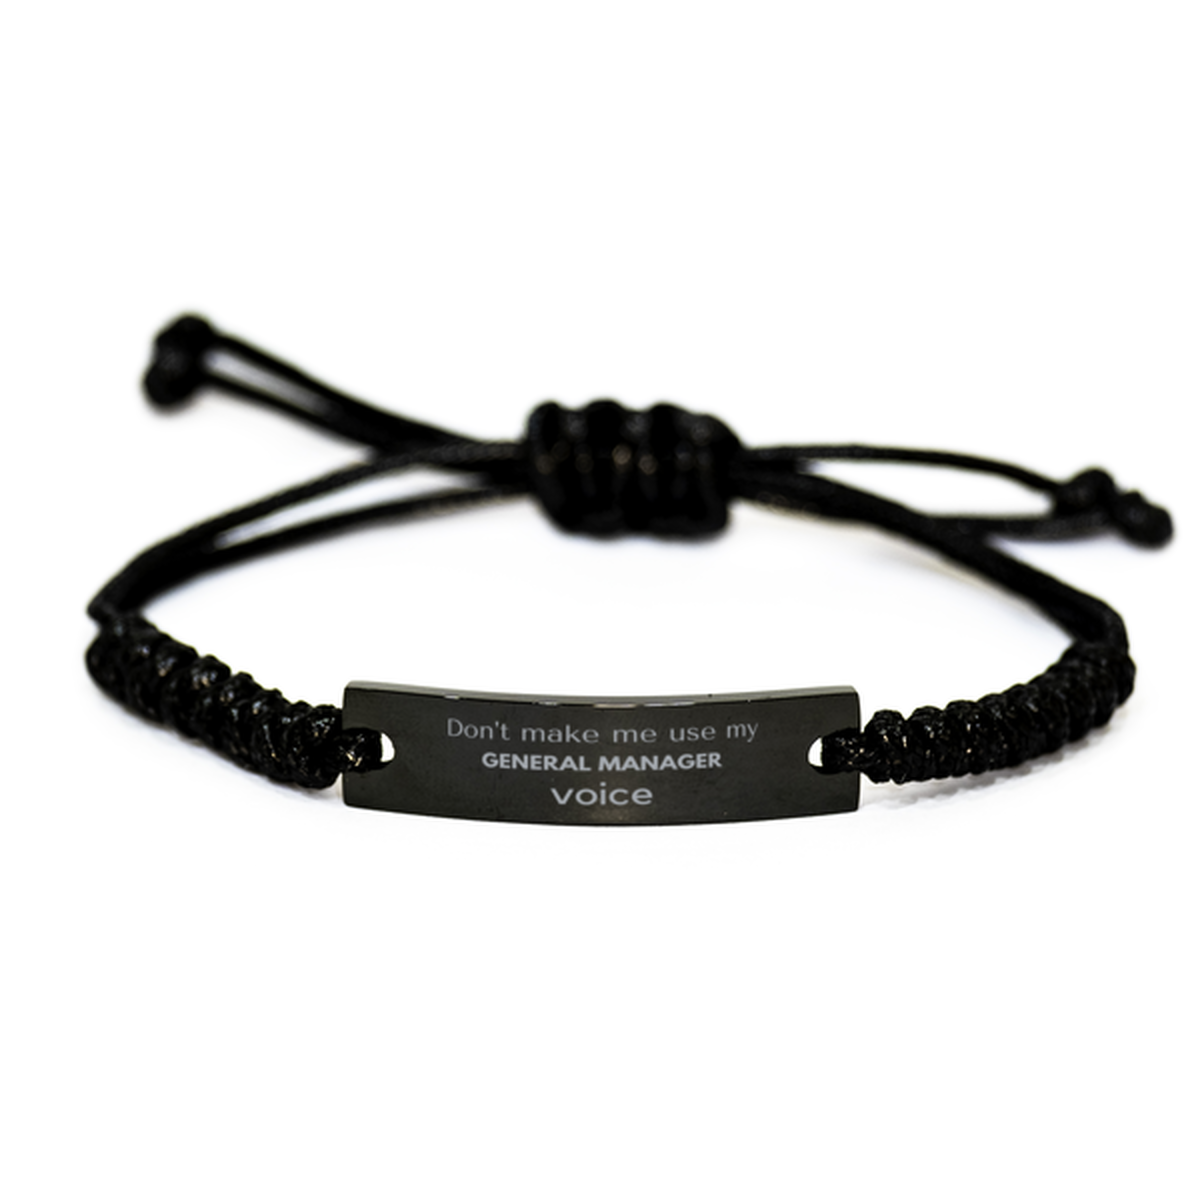 Don't make me use my General Manager voice, Sarcasm General Manager Gifts, Christmas General Manager Black Rope Bracelet Birthday Unique Gifts For General Manager Coworkers, Men, Women, Colleague, Friends